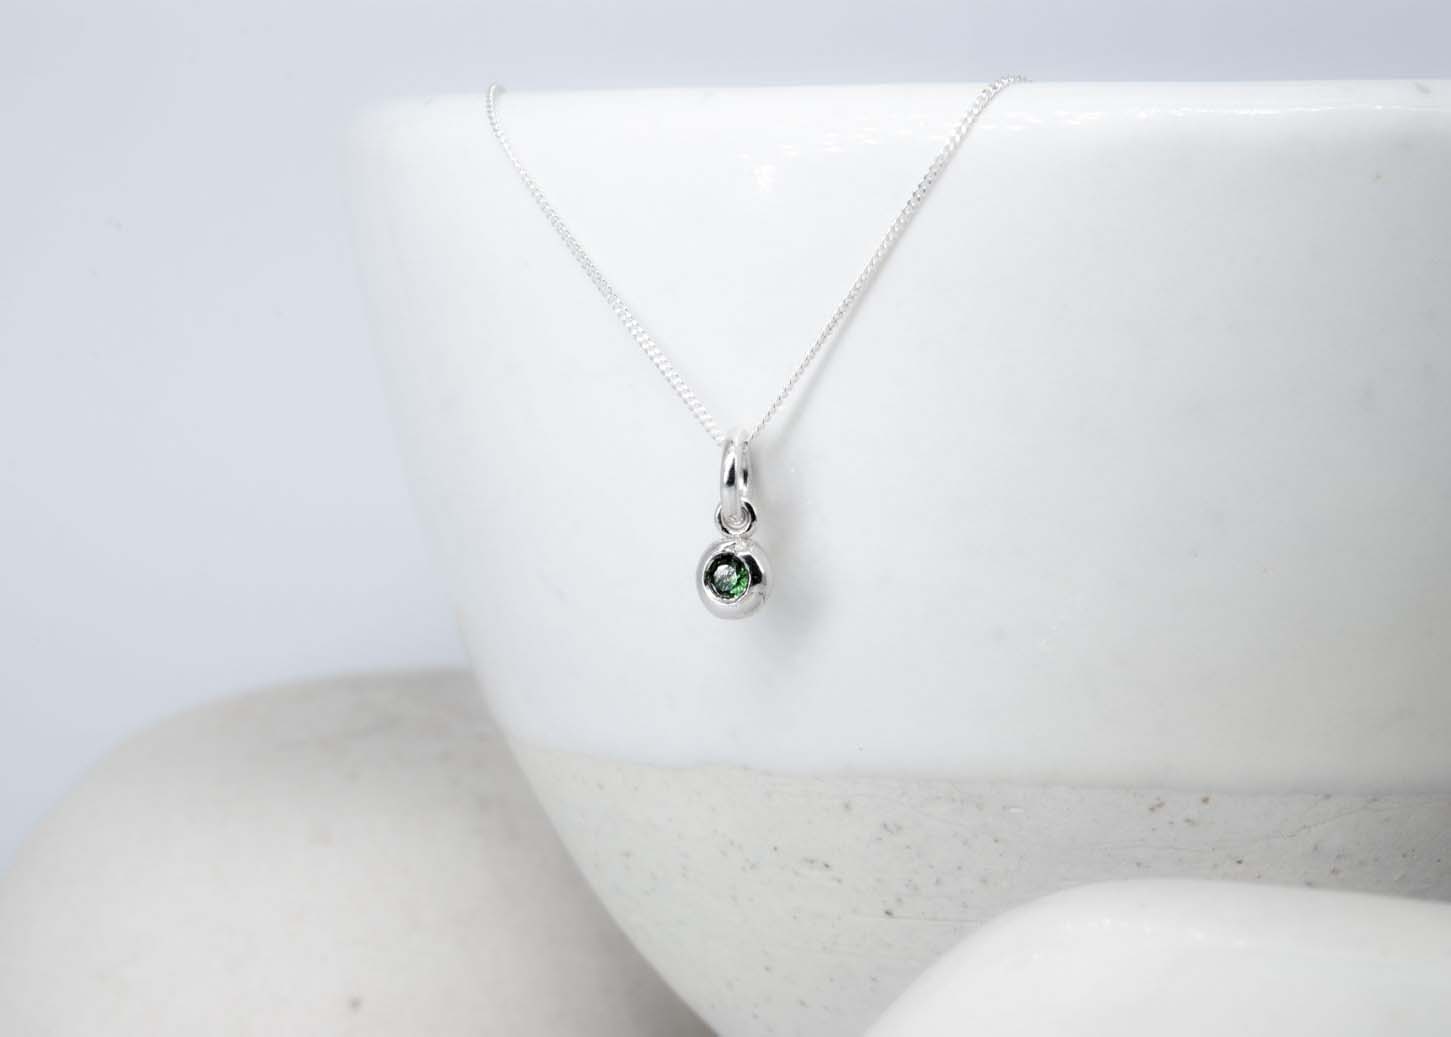 Emerald River Gem Necklace - May